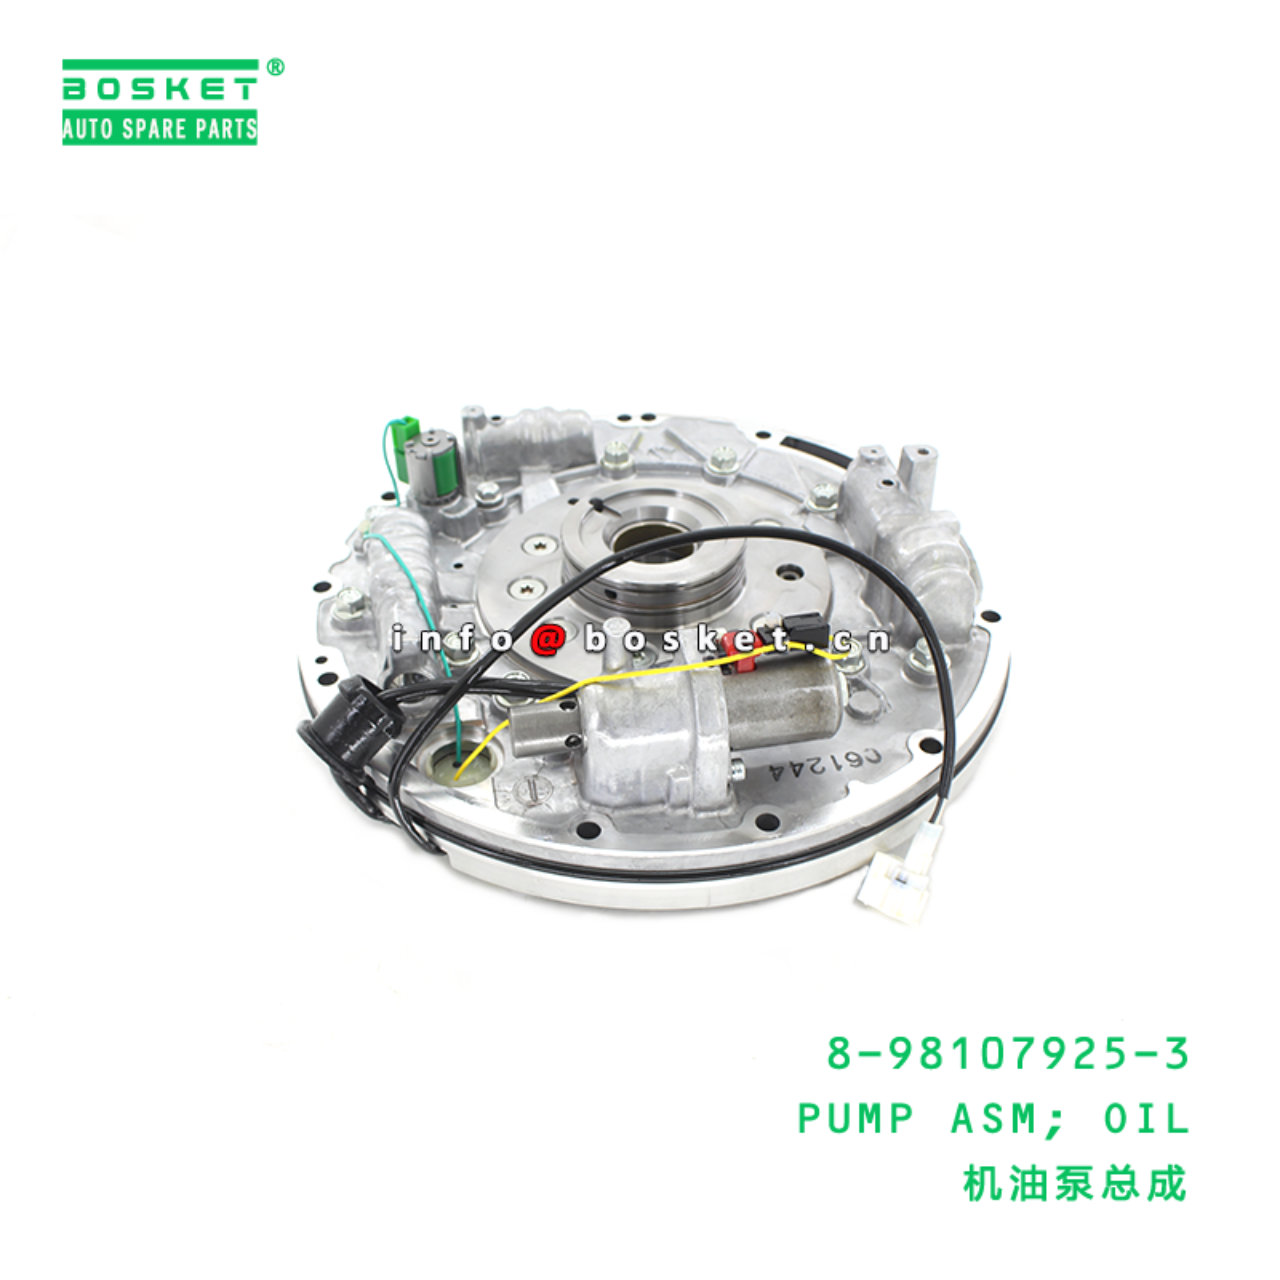 8-98107925-3 Oil Pump Assembly 8981079253 Suitable for ISUZU F Series Truck